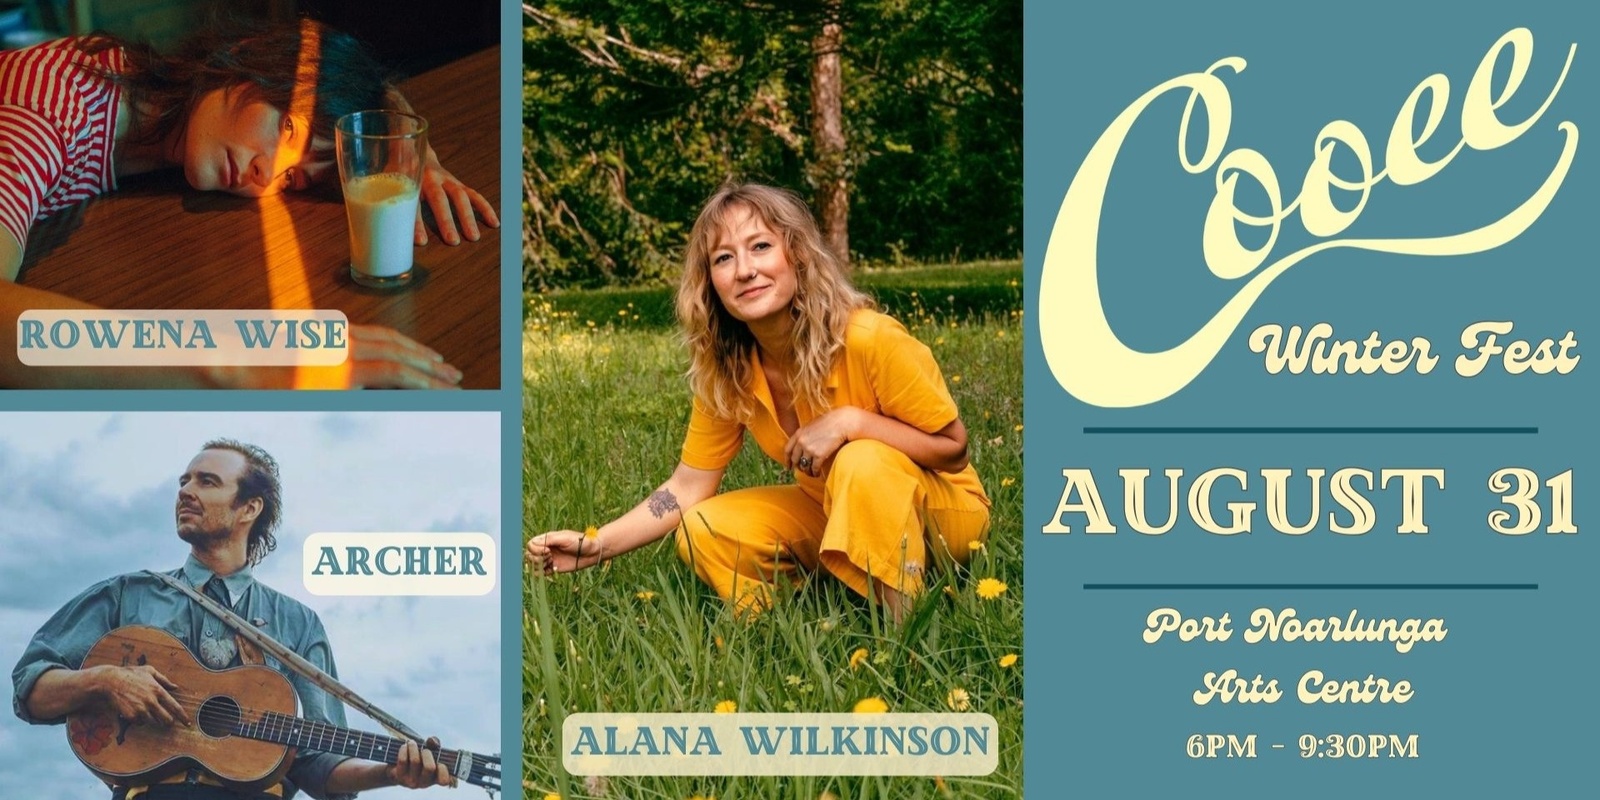 Banner image for Cooee Winter Fest - featuring Alana Wilkinson, Archer & Rowena Wise